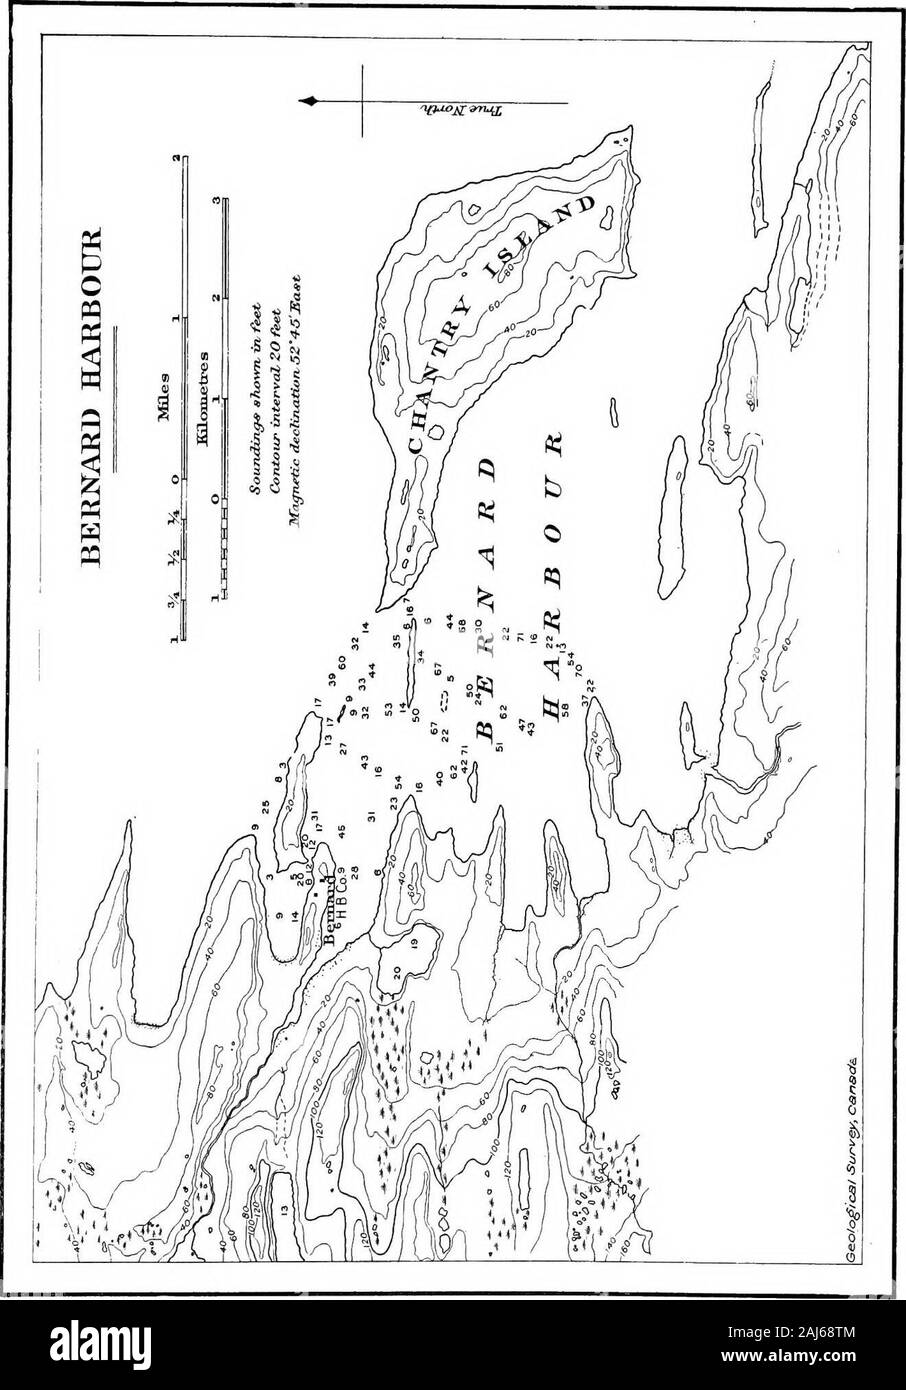 Report of the Canadian Arctic Expedition 1913-18 . Grantley harbour, Alaska, surveyed by Commander Trollope in 1854. Drawn from Admiralty Chart No. 693,Yukon Eiver to Point Barrow, including Bering Strait. Soundings in fathoms. Crustacean Life n27 ? Plate ^ ^ ^ ^ *fy  i -^  / f^ -; !j .^ ^ 1 y  ( CJ ^ ^ - rt / --?—{ ^-. ^ - i^    iM Js-^^^   -:5 ^1 IN-H / v M-. isi % •* ^ ^ U -?Ojr -..5:..,,,,^ o --   w s I •» Q, / -^ &gt; .*r ID IH C (0 Ctf i c ( &lt;^ o ^ * ^ ^t»»^**^ ^a -«  V f o 1-1  / o i/^C f 2- - e d u  •s.»^  ^ E. ^  ^ ^ Y ^^ ^ ^ -1 V  »..„ rf K ^ 1 f il f ^r- [ / iL Stock Photo